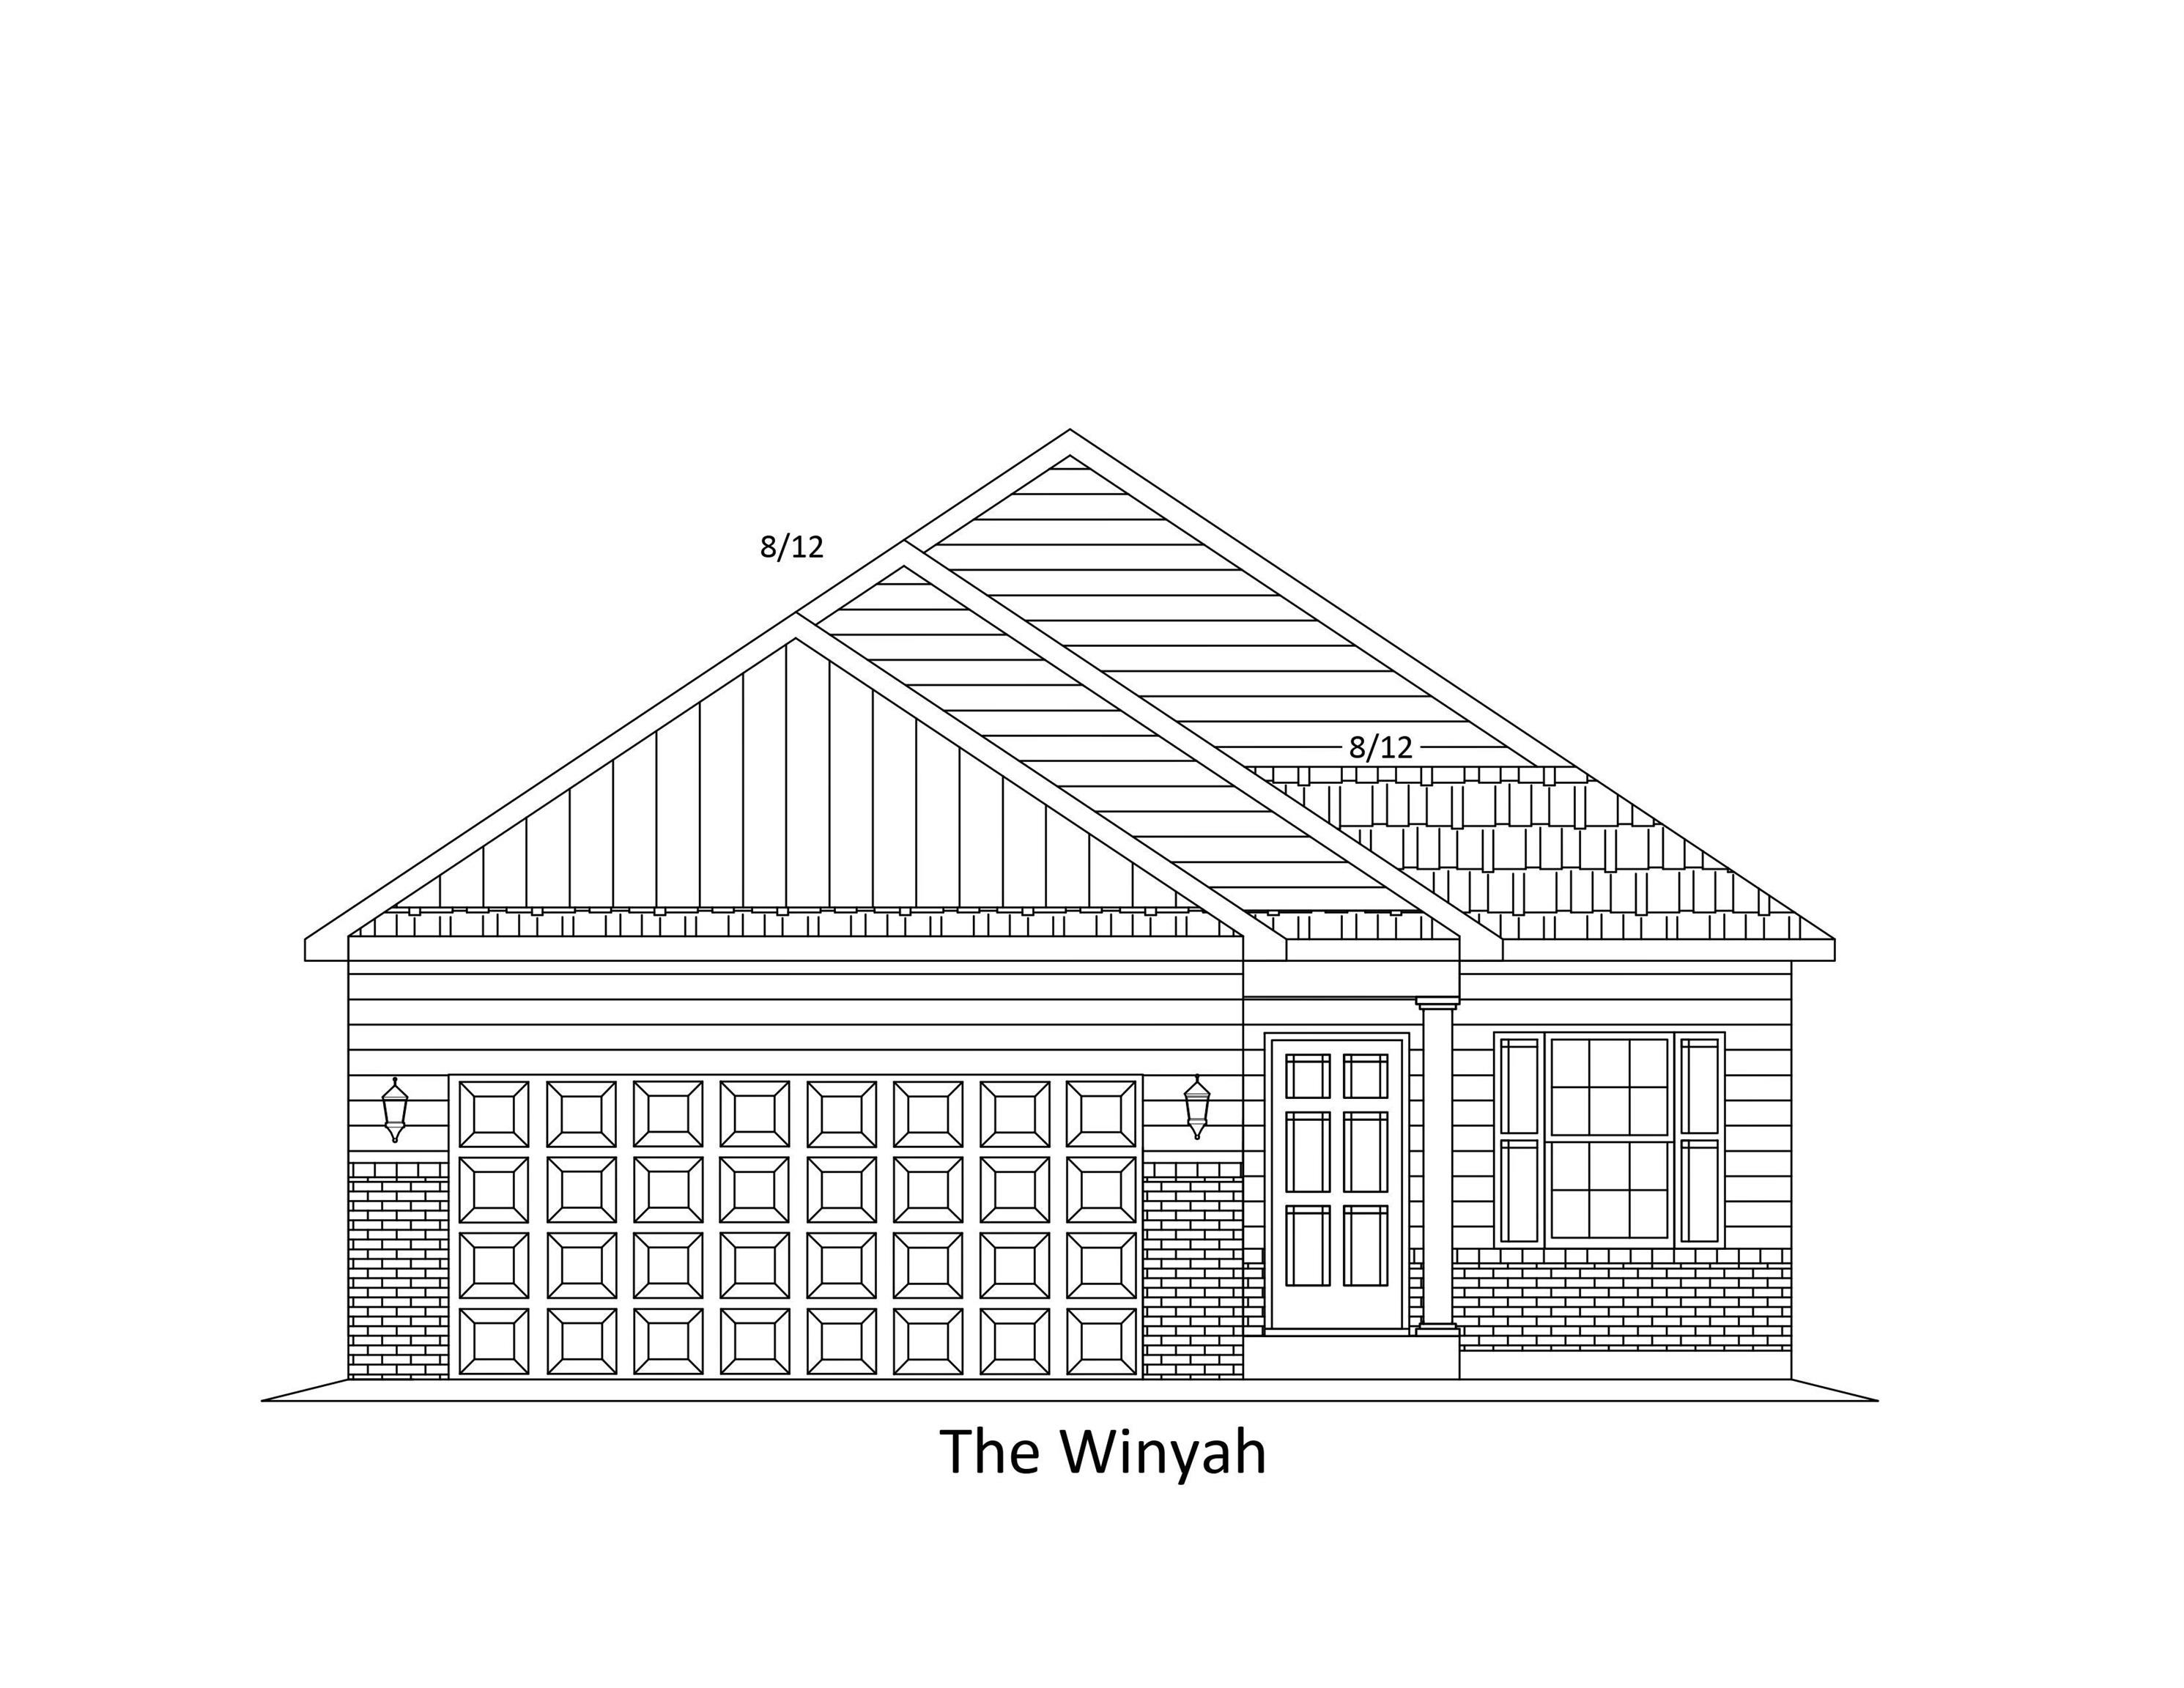 this new winyah plan located in woodside crossing is one of the most exciting floor plans that we offer. you will enjoy 3 bedrooms all on one level with over 1500 heated sq ft showcasing a light and bright kitchen, dining area, and family room that incorporates an open design. designer kitchen featuring stainless steel appliances, profiled aristokraft™ shaker style cabinets with upgraded hardware, polished stainless steel sink and pull out faucet, durable waterproof laminate flooring in living areas with stain resistant carpet in bedrooms, interior trim package includes window casings and stool for durability and appeal, relaxing baths with cultured marble countertops with integral bowl; executive height vanities in all bathrooms; elongated toilets; maintenance free exterior features such as premium vinyl siding, soffits and fascia; and high performance gaf™ architectural shingles, spacious covered rear porch overlooking extra grilling patio, natural gas package including gas heat, rinnai™ tankless hot water, and gas range, vaulted ceilings, 2 car painted and trimmed garage with liftmaster™ myq wifi enabled garage door opener, and drop down attic access for storage. your master suite, separate from the other bedrooms, includes a large shower, walk-in closet, plus a separate linen closet for additional storage. woodside crossing will also have a swimming pool, cabana, community sidewalks, and a dog park for residents to enjoy! woodside crossing is located on four mile road within minutes to downtown conway and all major thoroughfares creating convenient and quick access to all that myrtle beach and conway have to offer. building lifestyles for over 35 years, we remain the premier homebuilder of new residential communities and custom homes in the grand strand and surrounding areas. we are three-time winners of the best home builder award from wmbf news best of the grand strand. in 2023, beverly homes was also voted best residential real estate developer in the myrtle beach herald reader’s choice awards. we began and remain in the grand strand, and we want you to experience the local pride we build today and every day in horry and georgetown counties. take comfort in one of our newly constructed homes that has a reputation for quality and value. whether you are a first-time home buyer or looking for your next home, we are excited to welcome you home at woodside crossing! pictures, photos, colors, and layouts are for illustration purposes only and can vary from home to home. customization may be possible – call listing agent for availability. square footages are approximate.